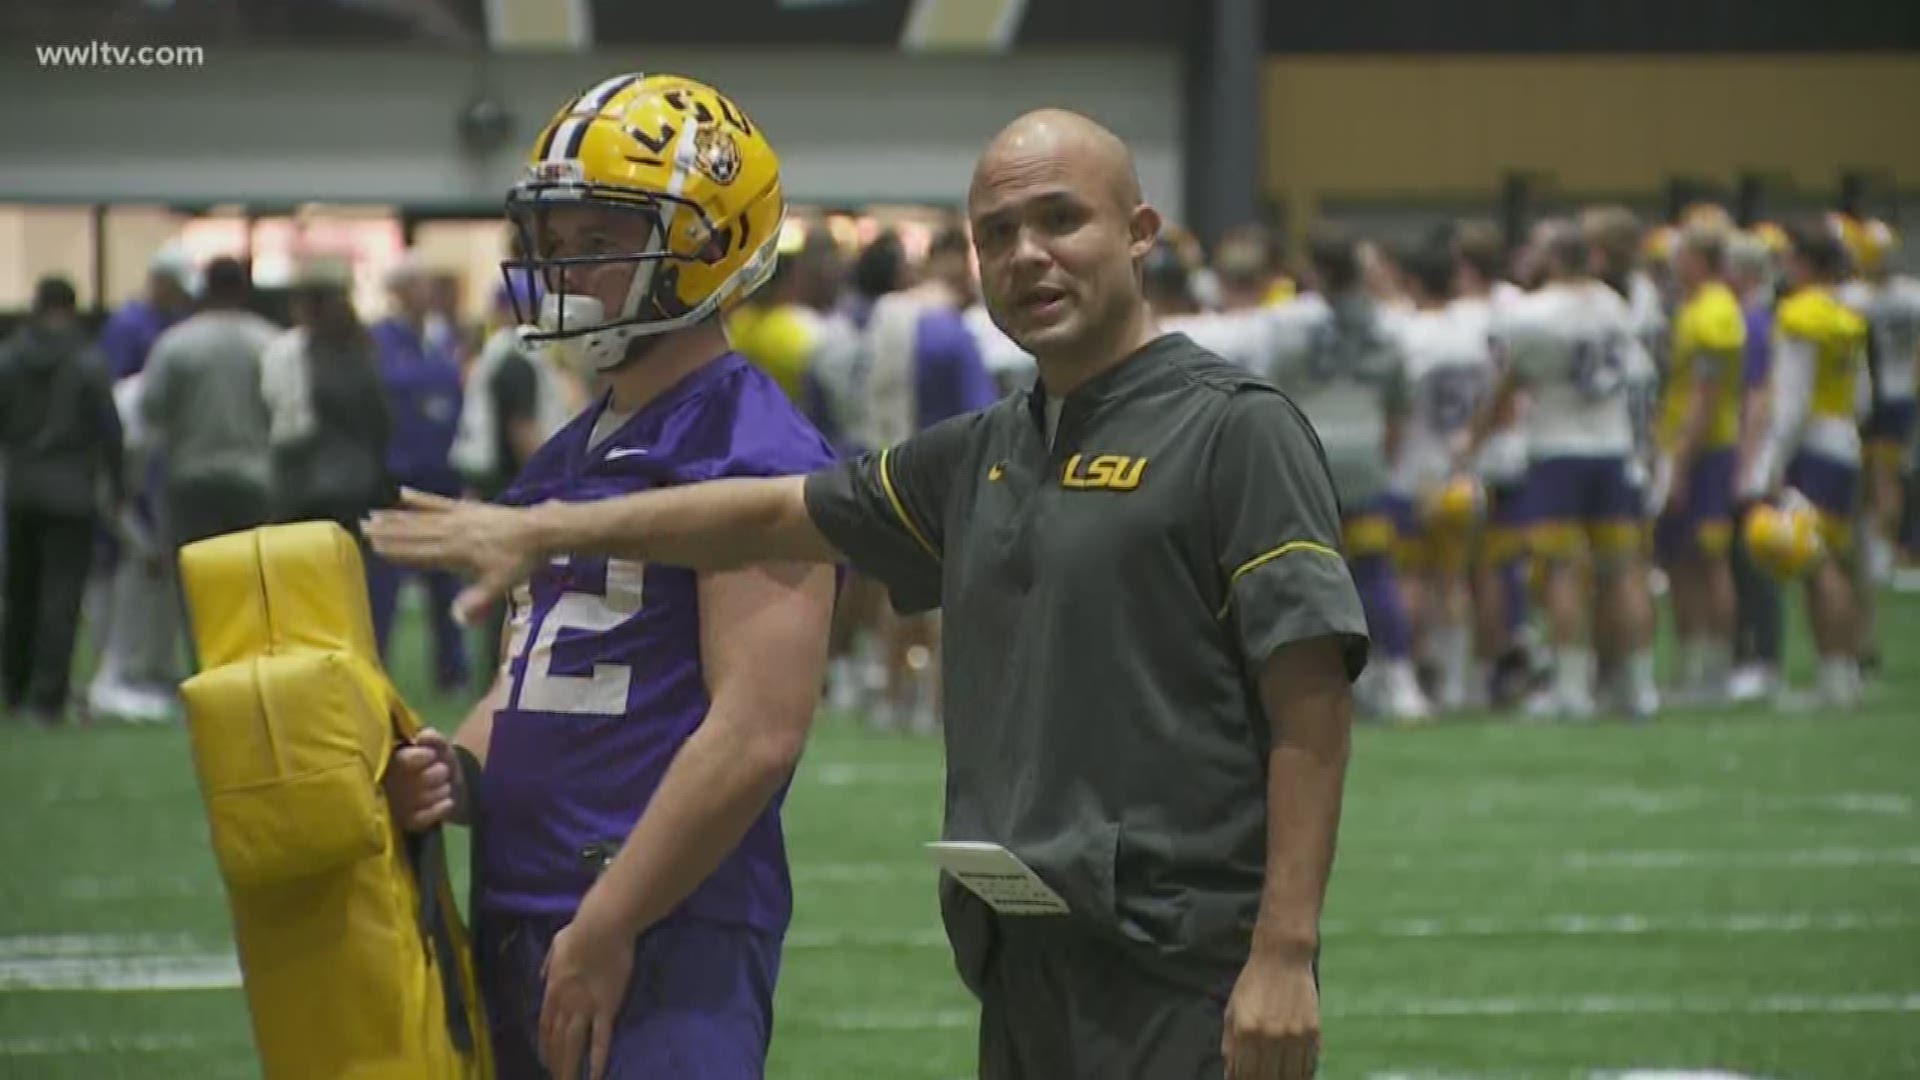 Dave Aranda, LSU's defensive coordinator since 2016 and a key piece of the Tigers' national title victory this season, is heading to Baylor University.